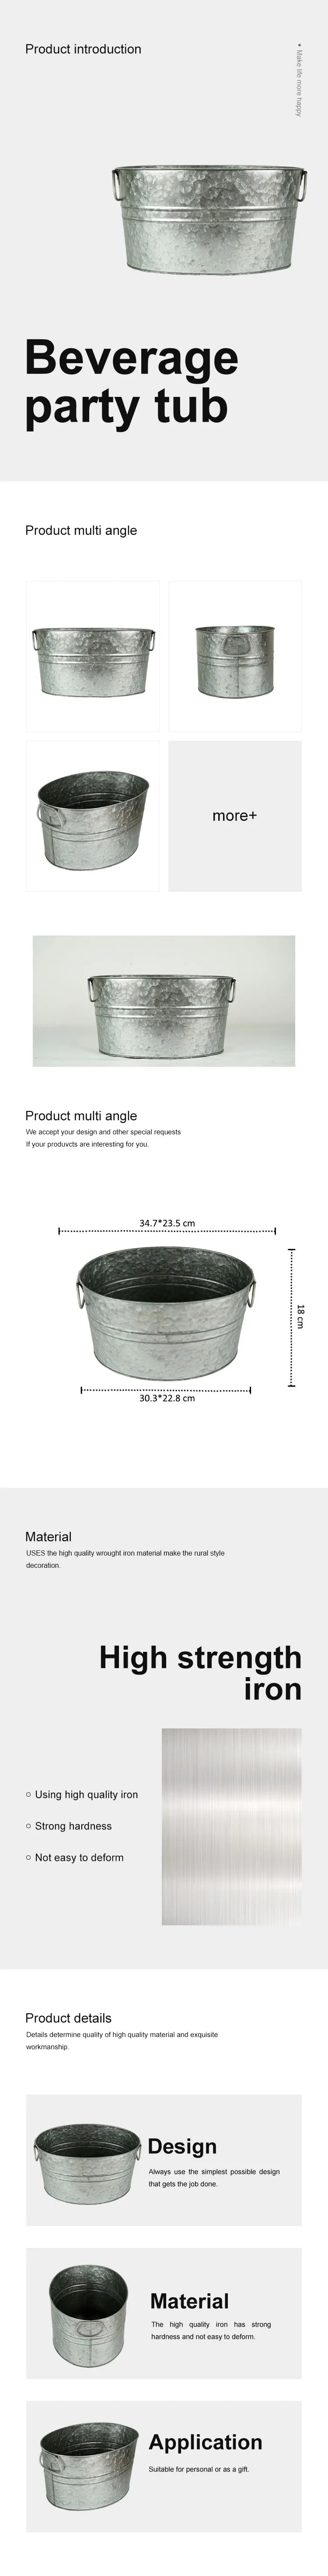 True Classic Oval Ice Bucket Galvanized Metal Drink Cooler Beverage Tub Chill Wine & Beer for party